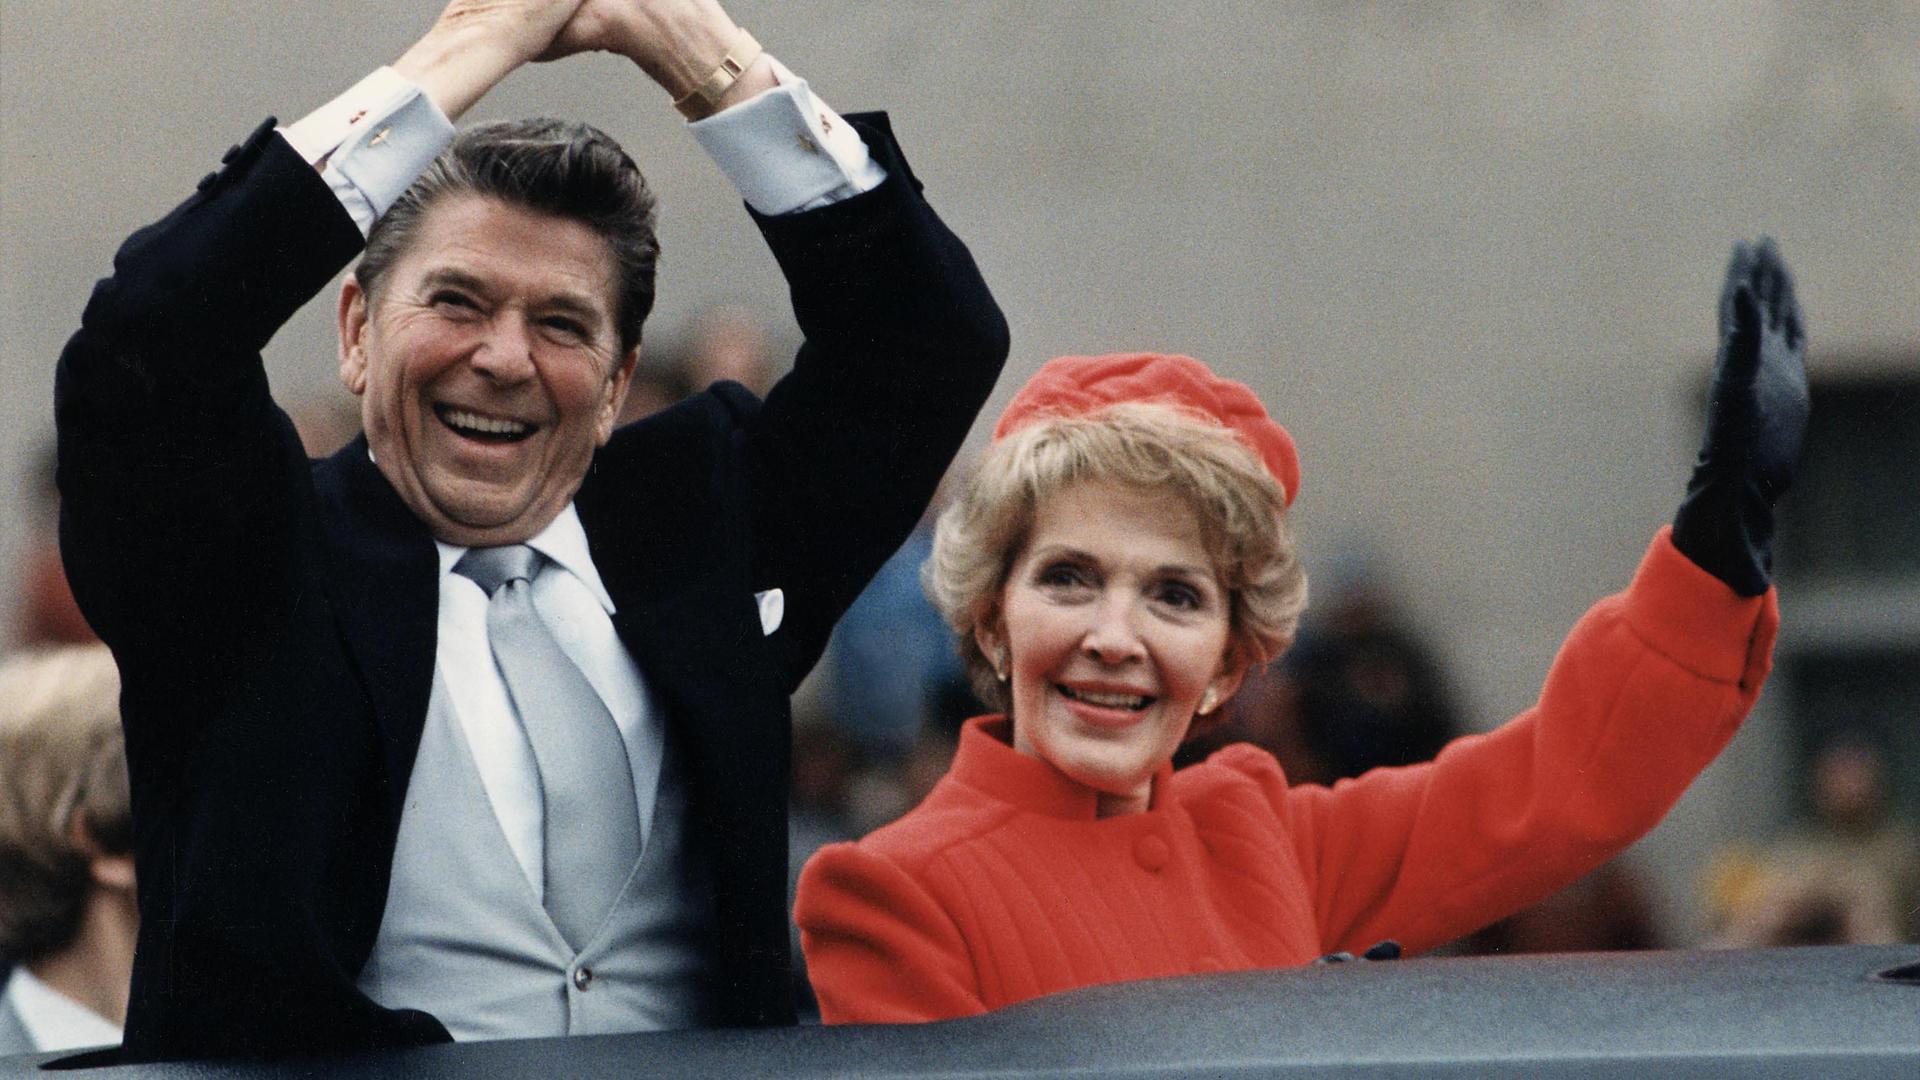 Ronald Reagan and his wife, Nancy, wave to crowds from their limousine during Reagan's first inauguration parade in 1981.